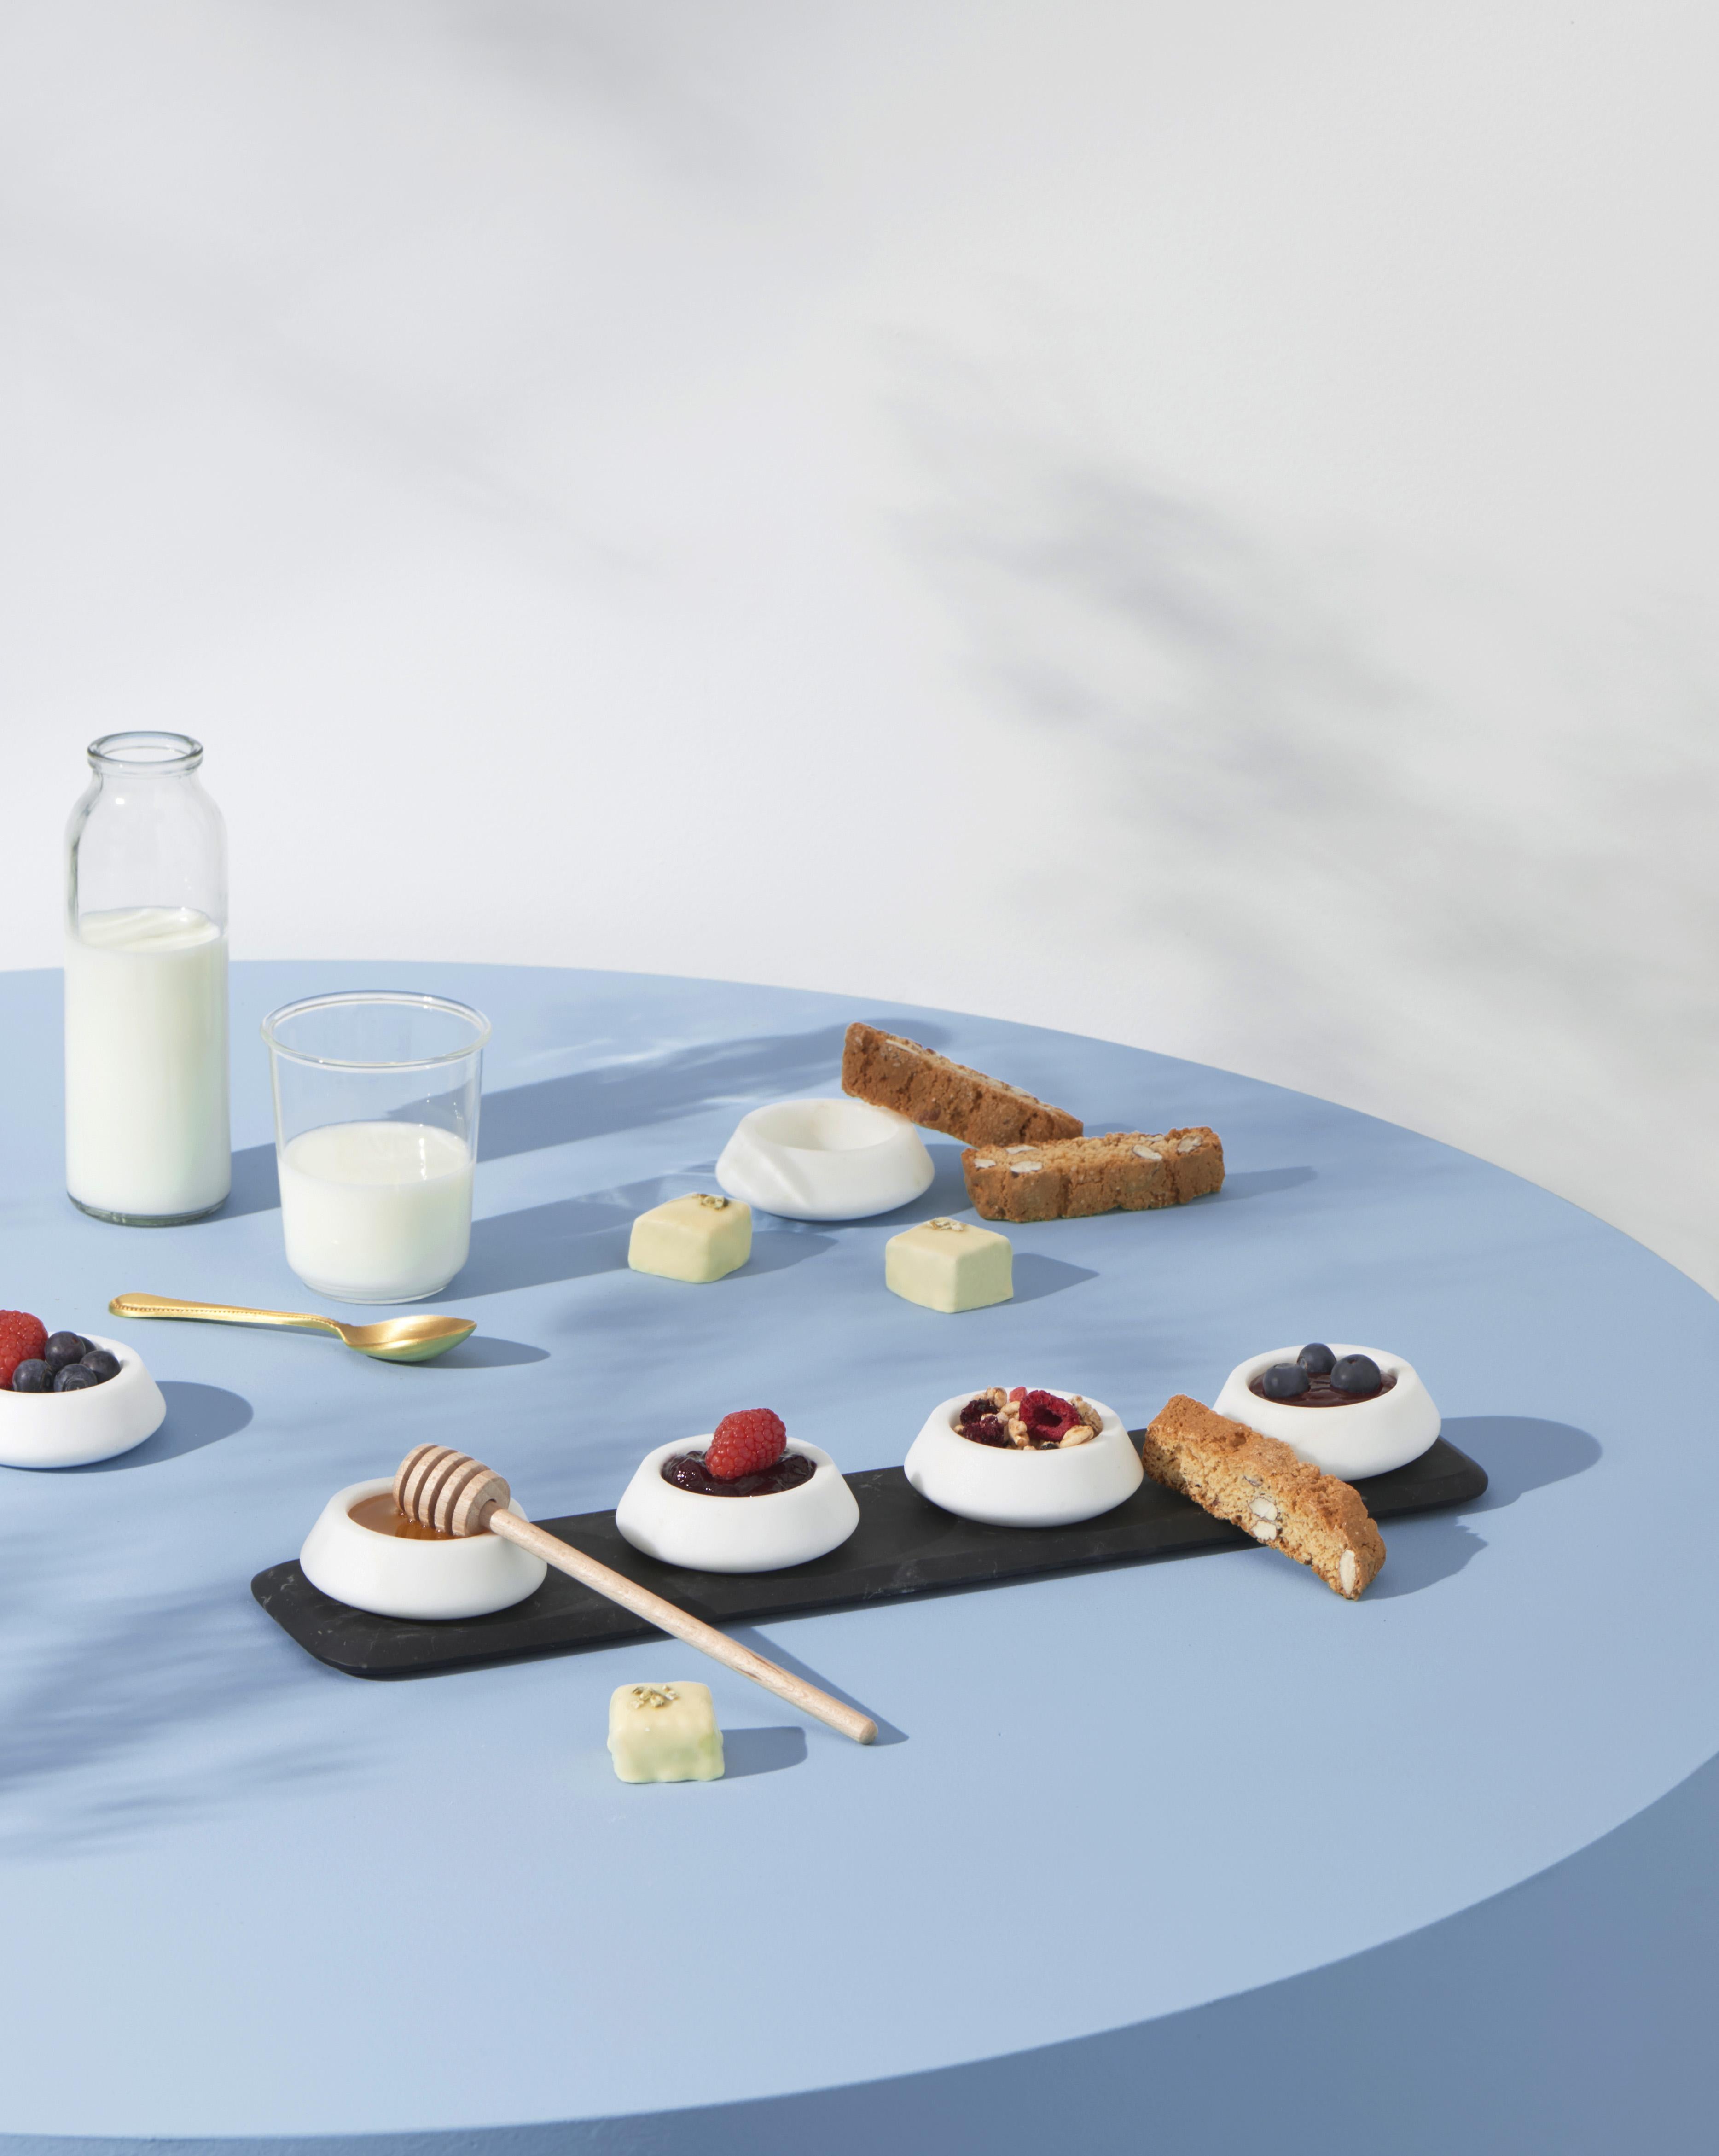 A sculptural shape for a container. Colominas’ project accomplishes curved marble that lends itself to carrying sauces or oils with designs that are always different. The item includes four white Michelangelo marble bowls.
Size: 39.4 x 9 x 1 cm